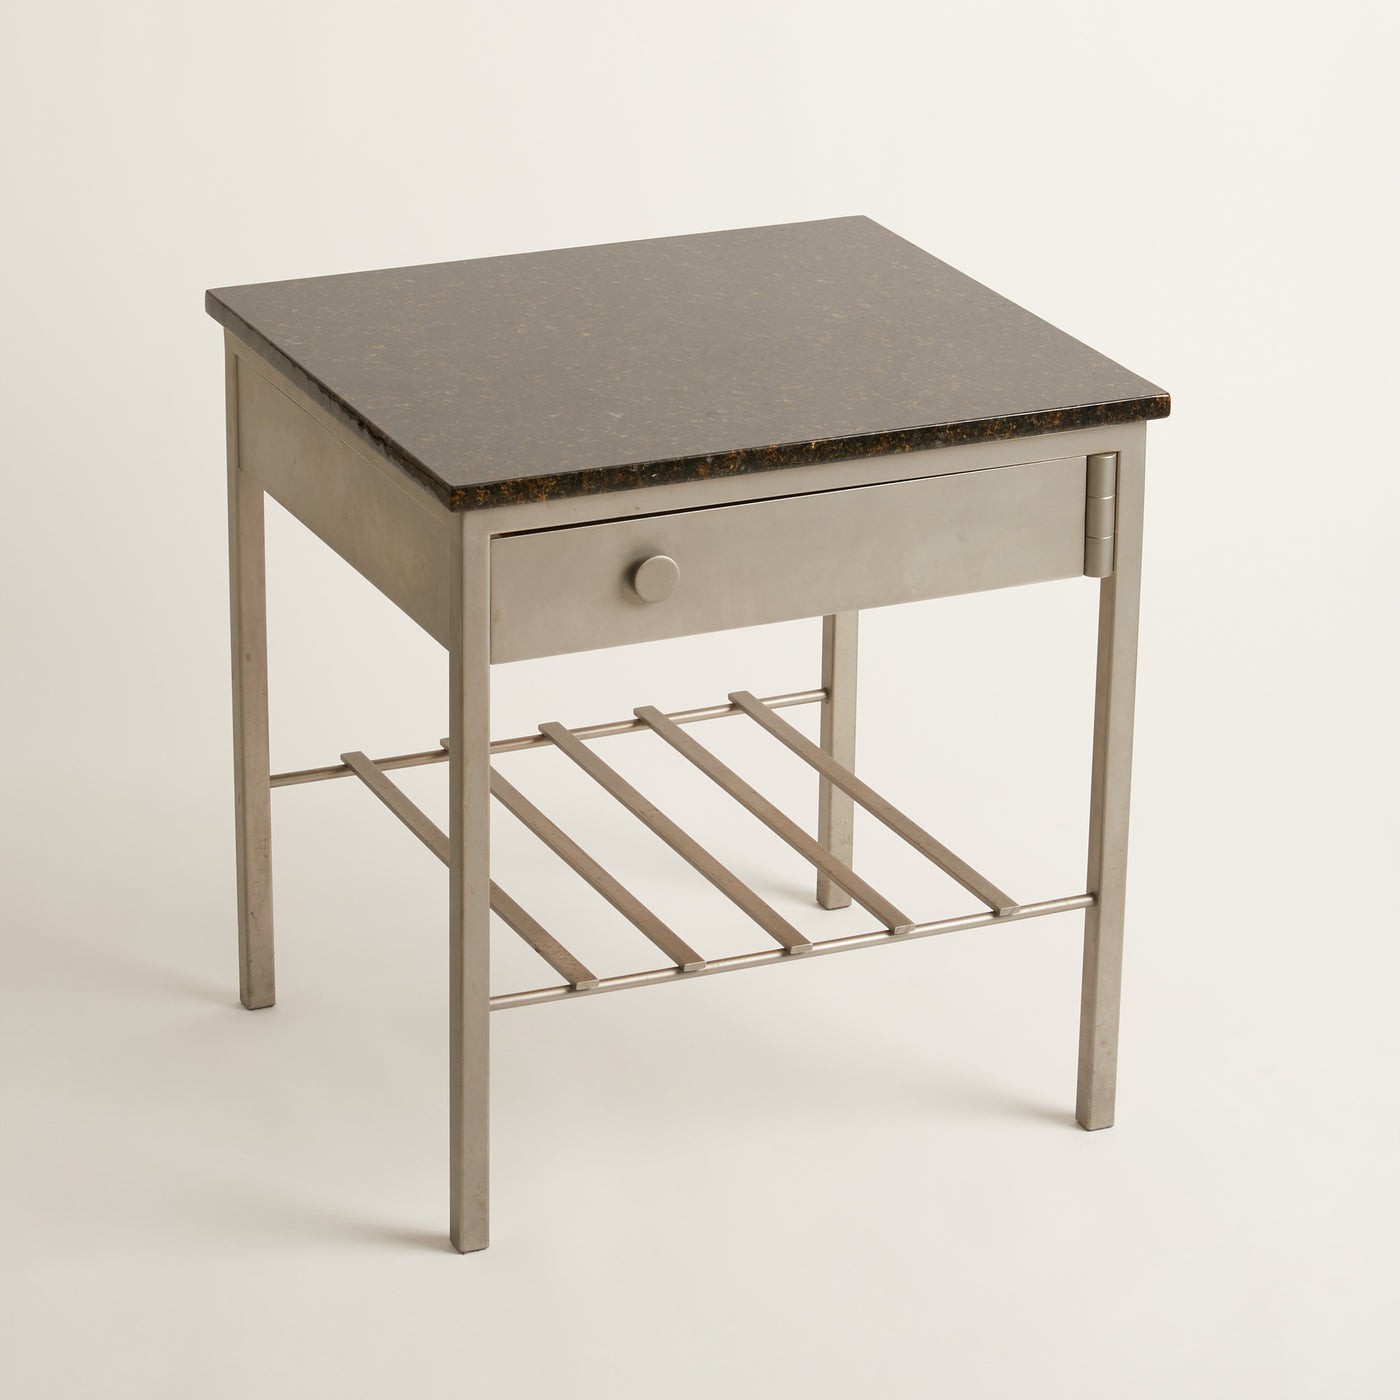 Steel Table with Swing Drawer & Stone Top c. 1990